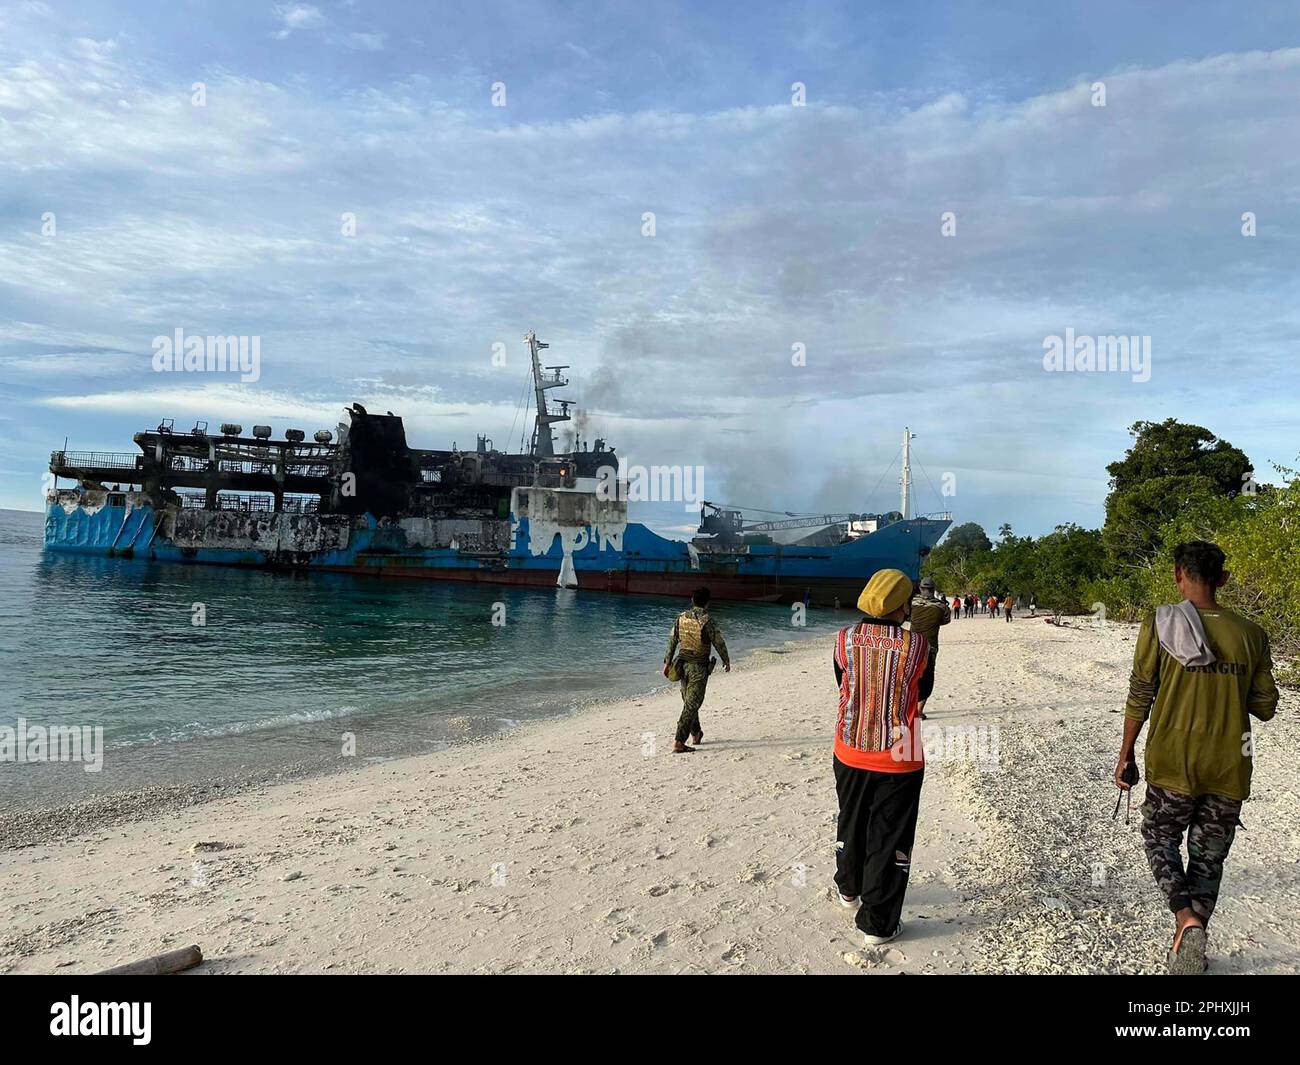 (230330) -- BASILAN PROVINCE, March 30, 2023 (Xinhua) -- The damaged M/V Lady Mary Joy 3 is seen along the coast of Basilan Province, the Philippines, March 30, 2023. A ferry carrying more than 200 people caught fire in the southern Philippines late Wednesday night, killing at least 10 passengers, the Philippine Coast Guard (PCG) said Thursday. (Pilas Island Local Government/Handout via Xinhua) Stock Photo